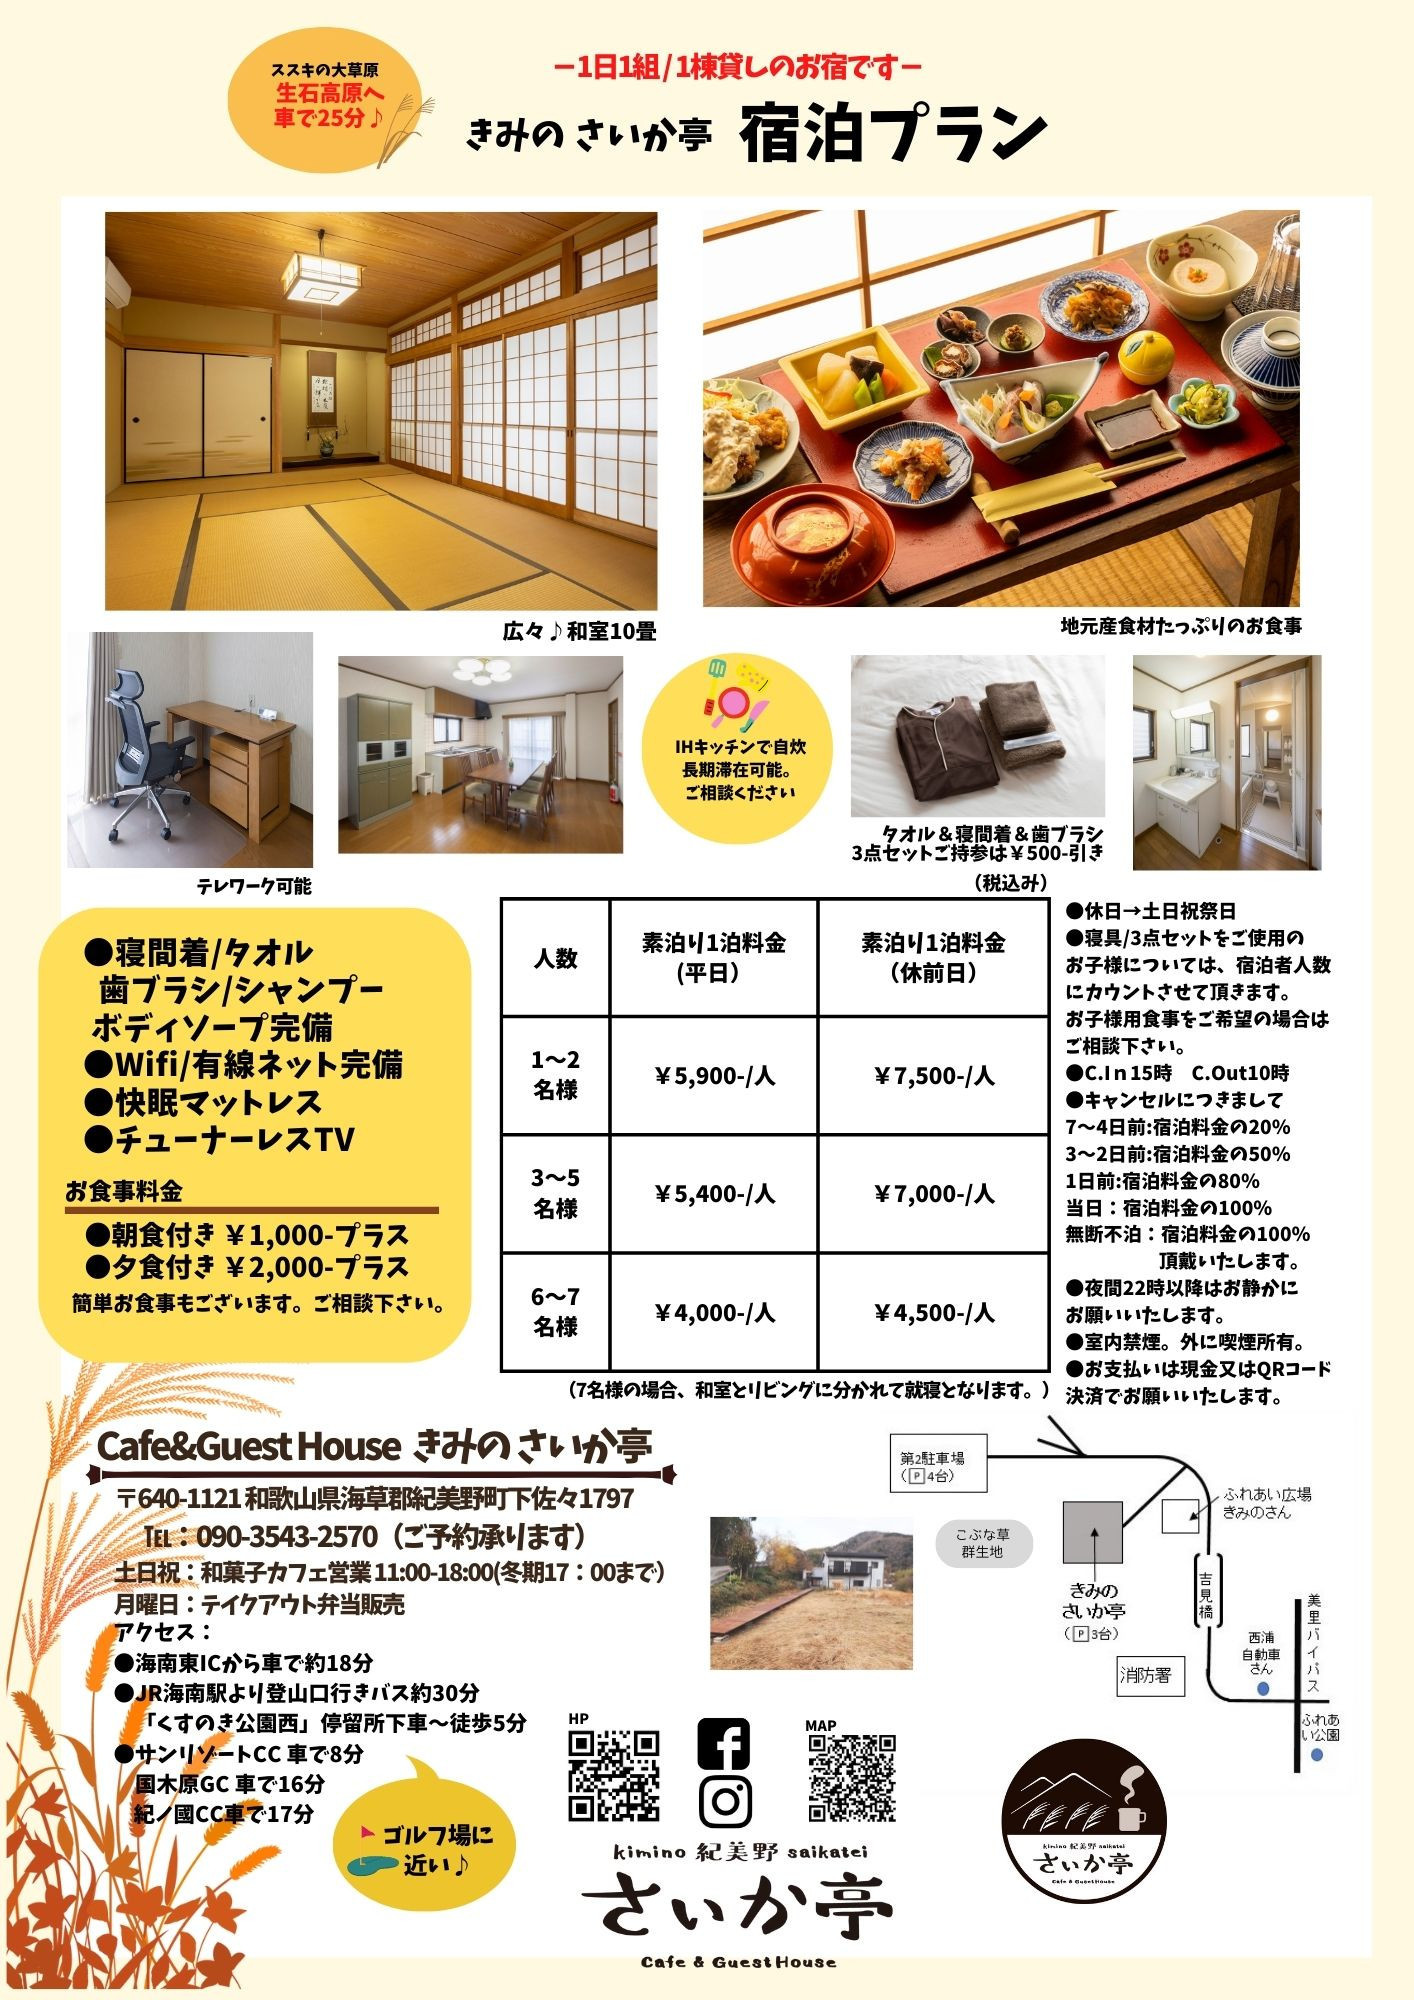 Cafe & Guest House きみの さいか亭